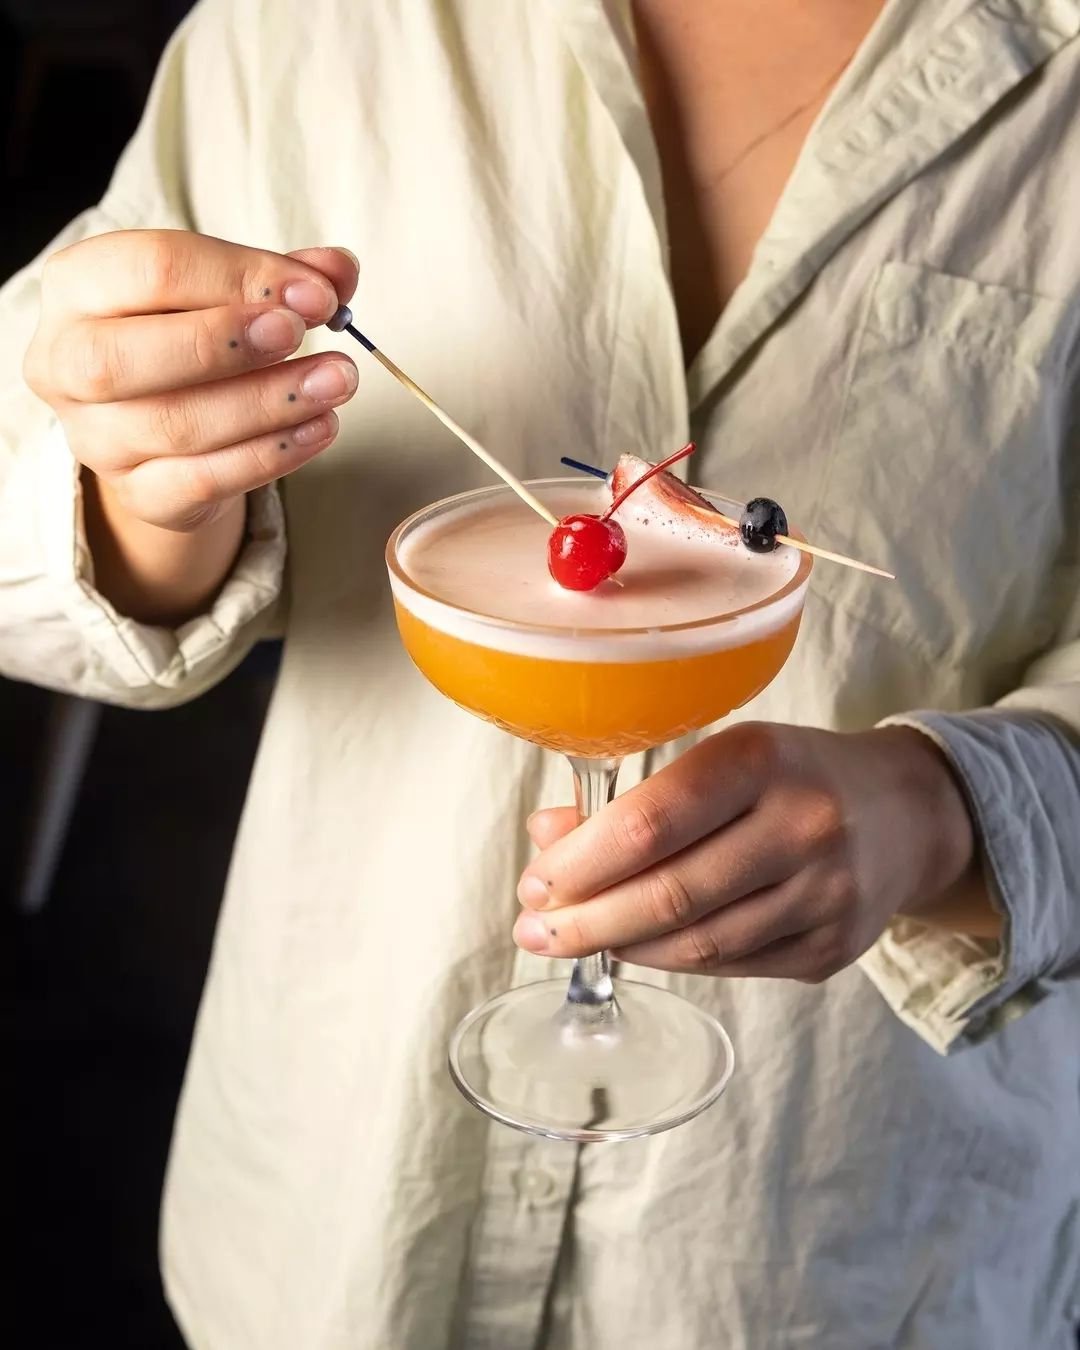 Amaretto Sour! Sweet 'n' sour - frothy with an almond buzz. Best topped with a maraschino cherry!&nbsp;🍒